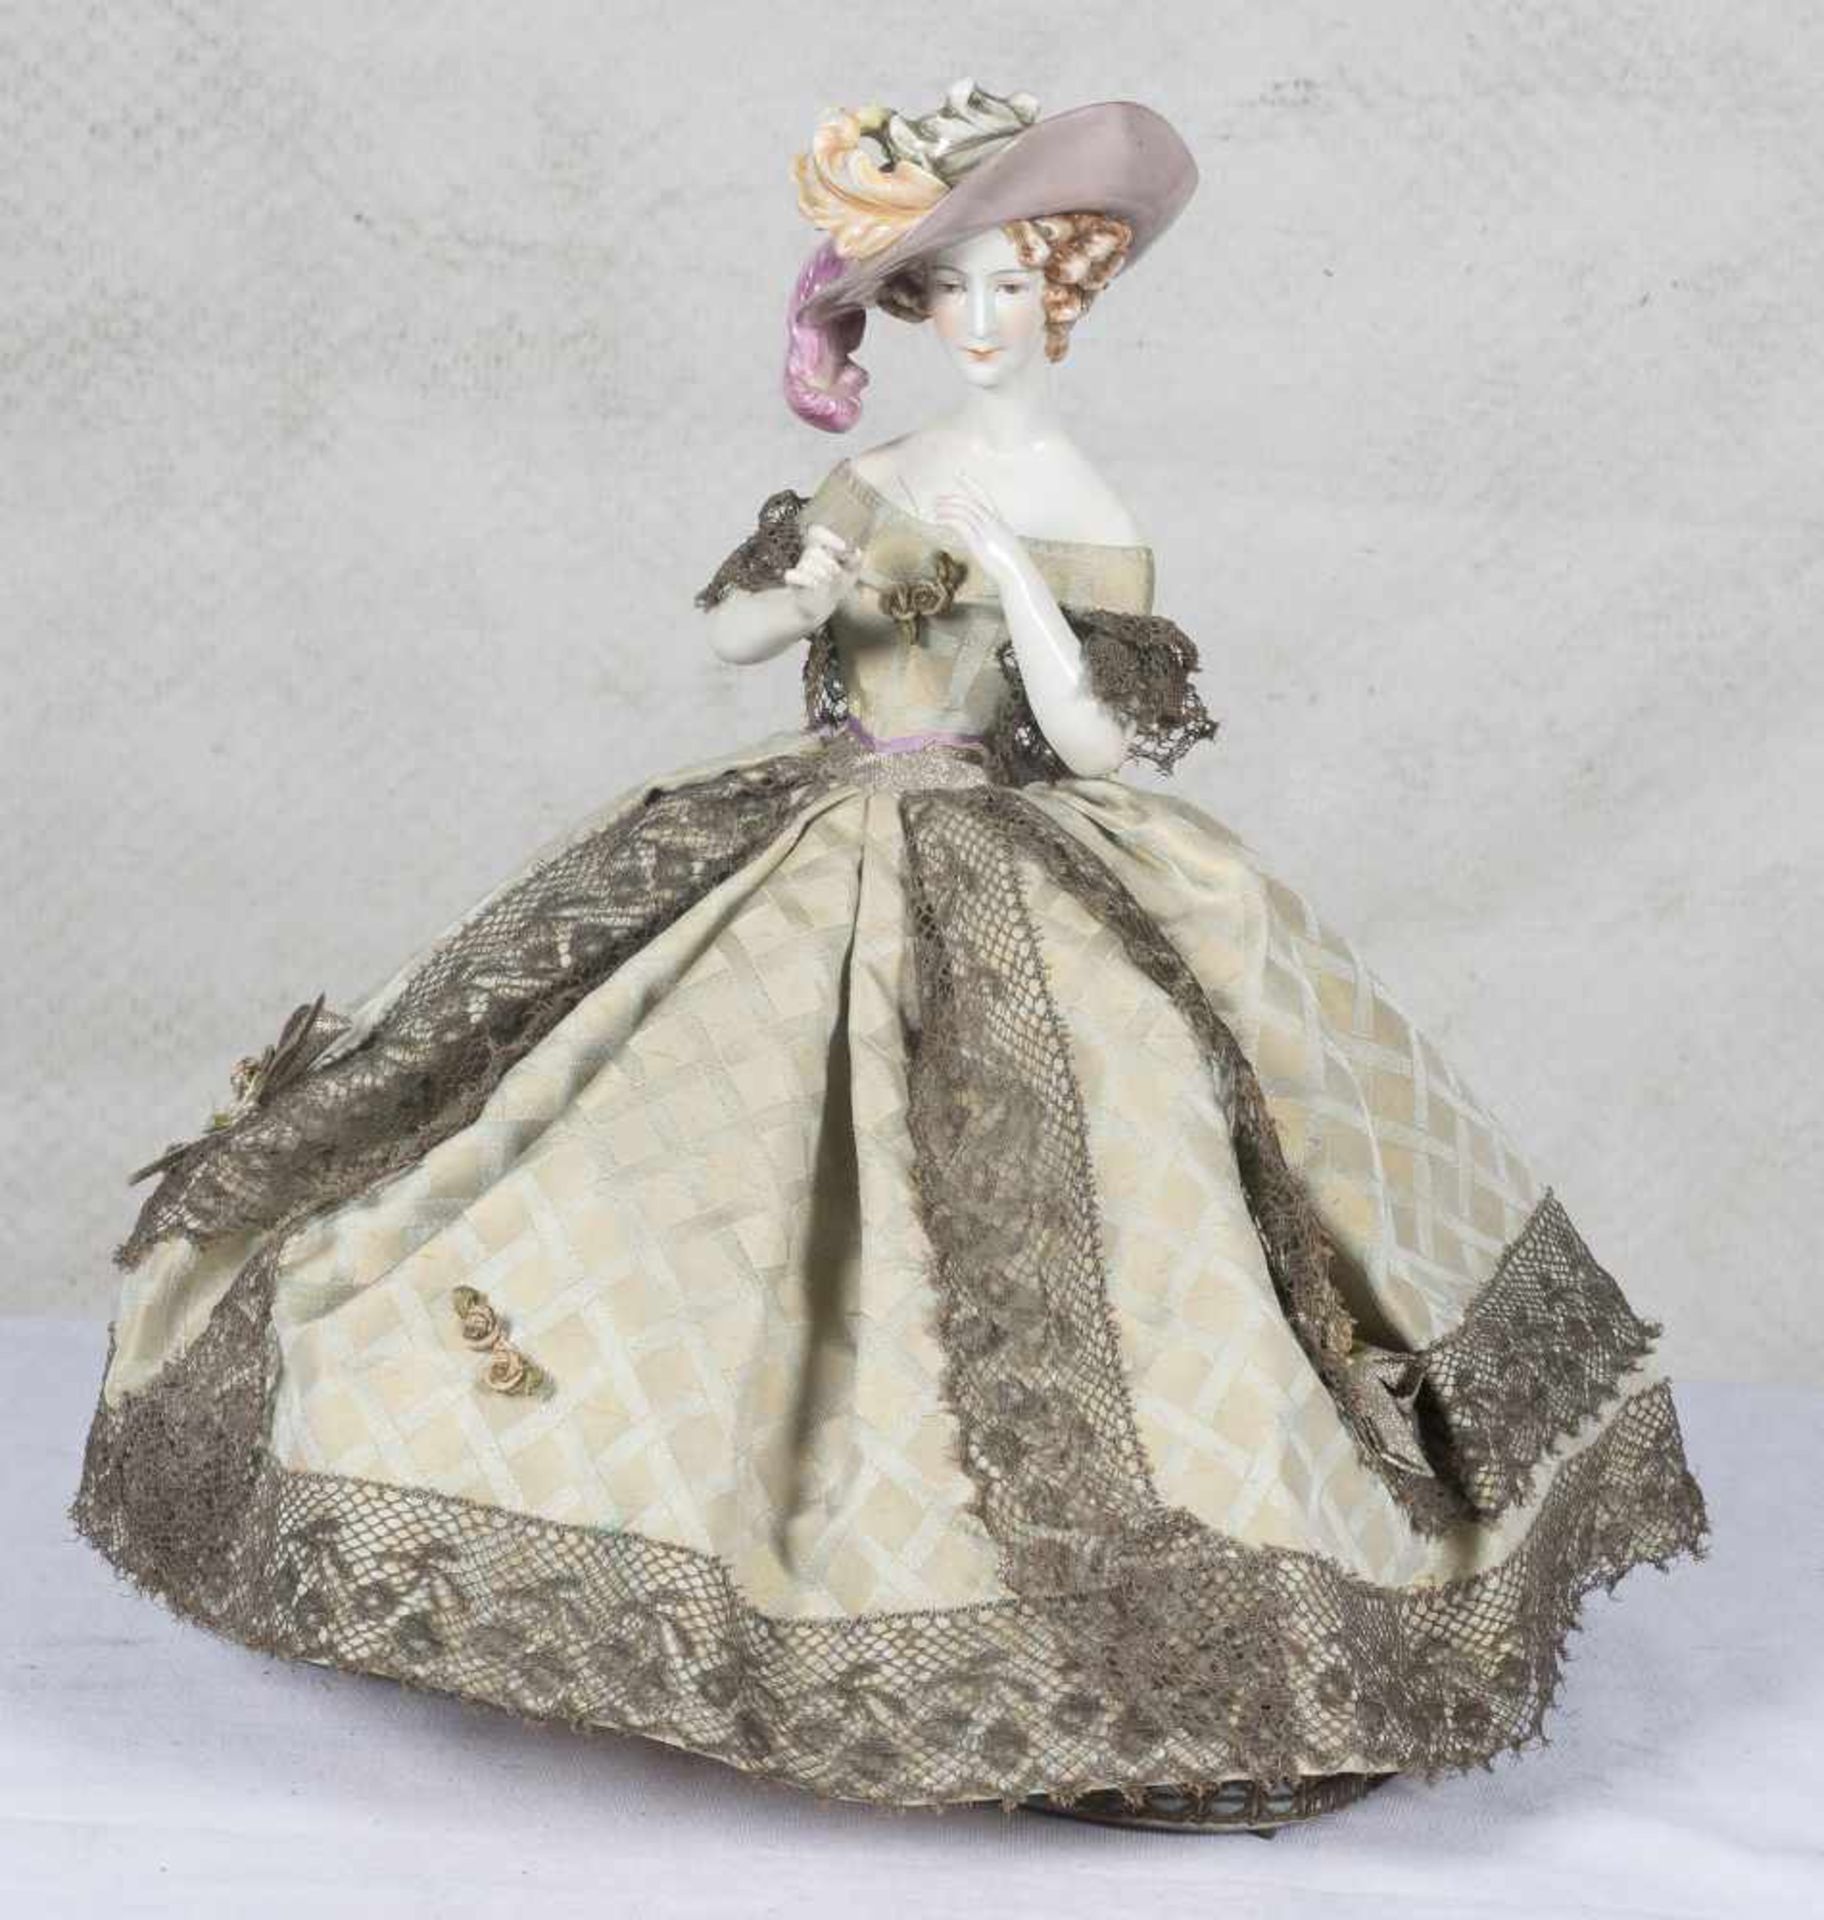 Polychromed porcelain doll wearing a knitwear and silk dress with a sewing kit hidden inside it. Art